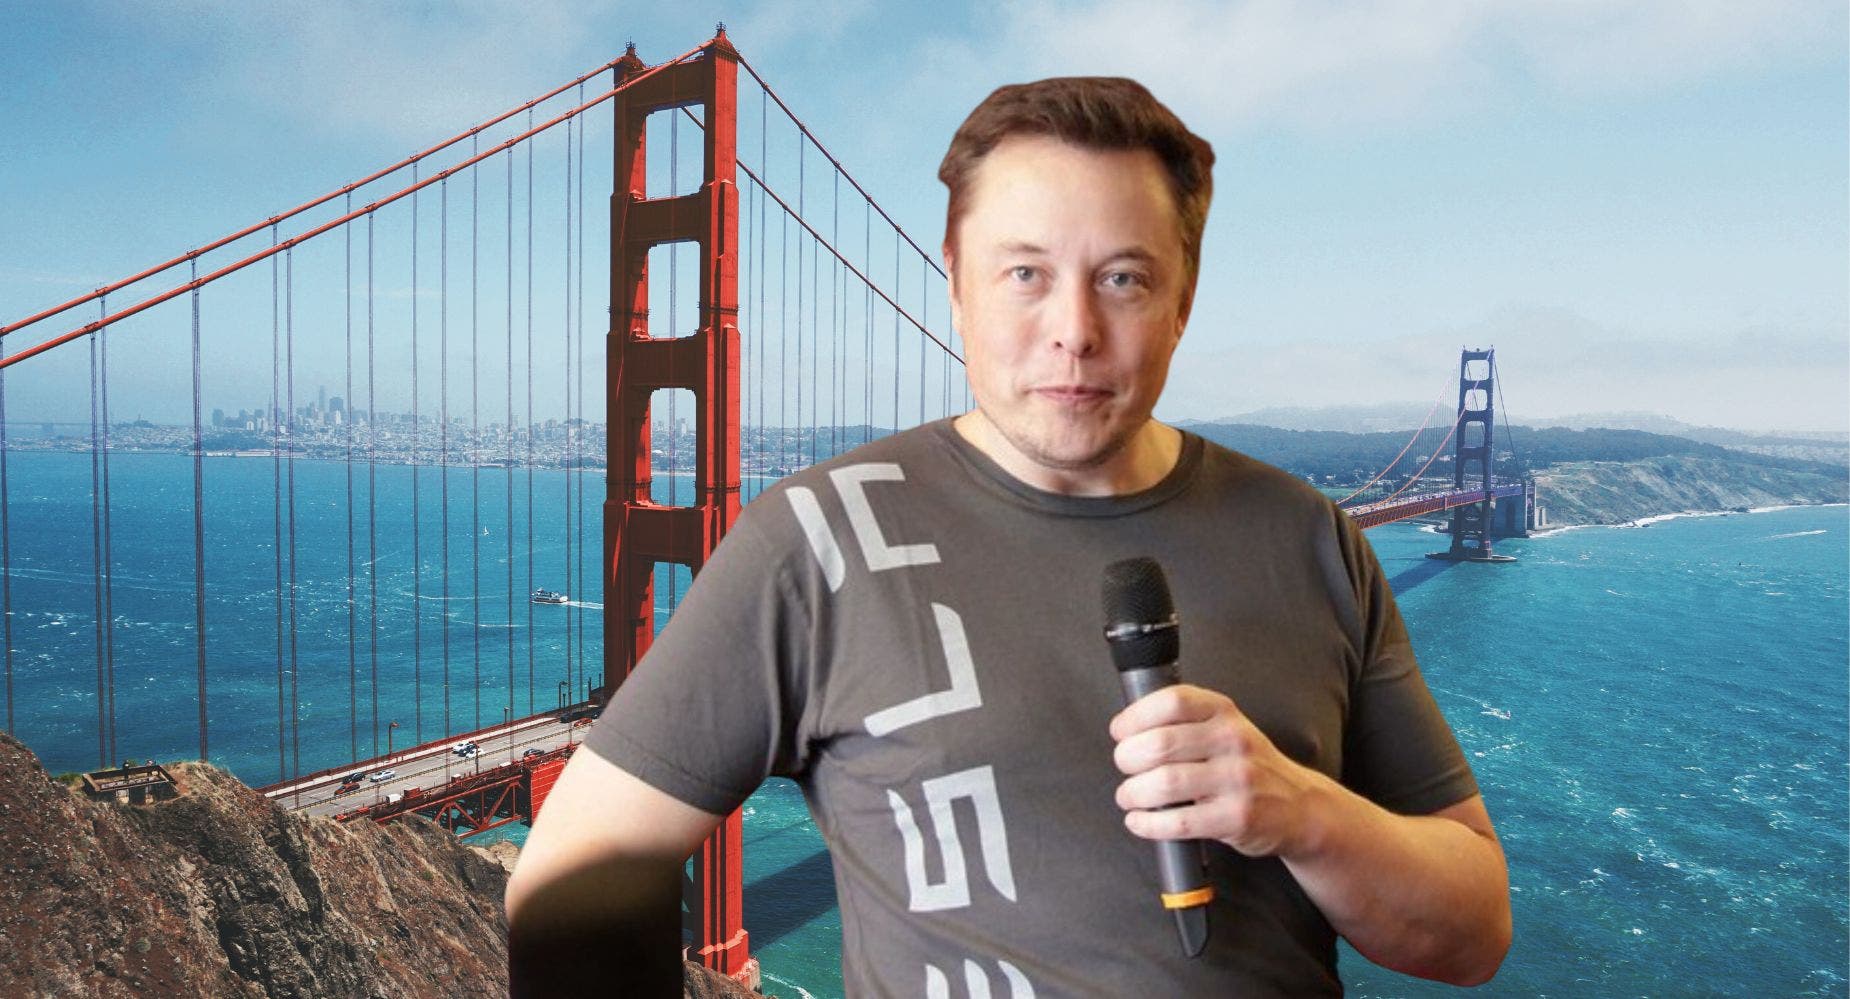 Is Tesla Leaving California? Elon Musk Shares Tesla's Plans For The State, His Concerns That 'There's No Room'